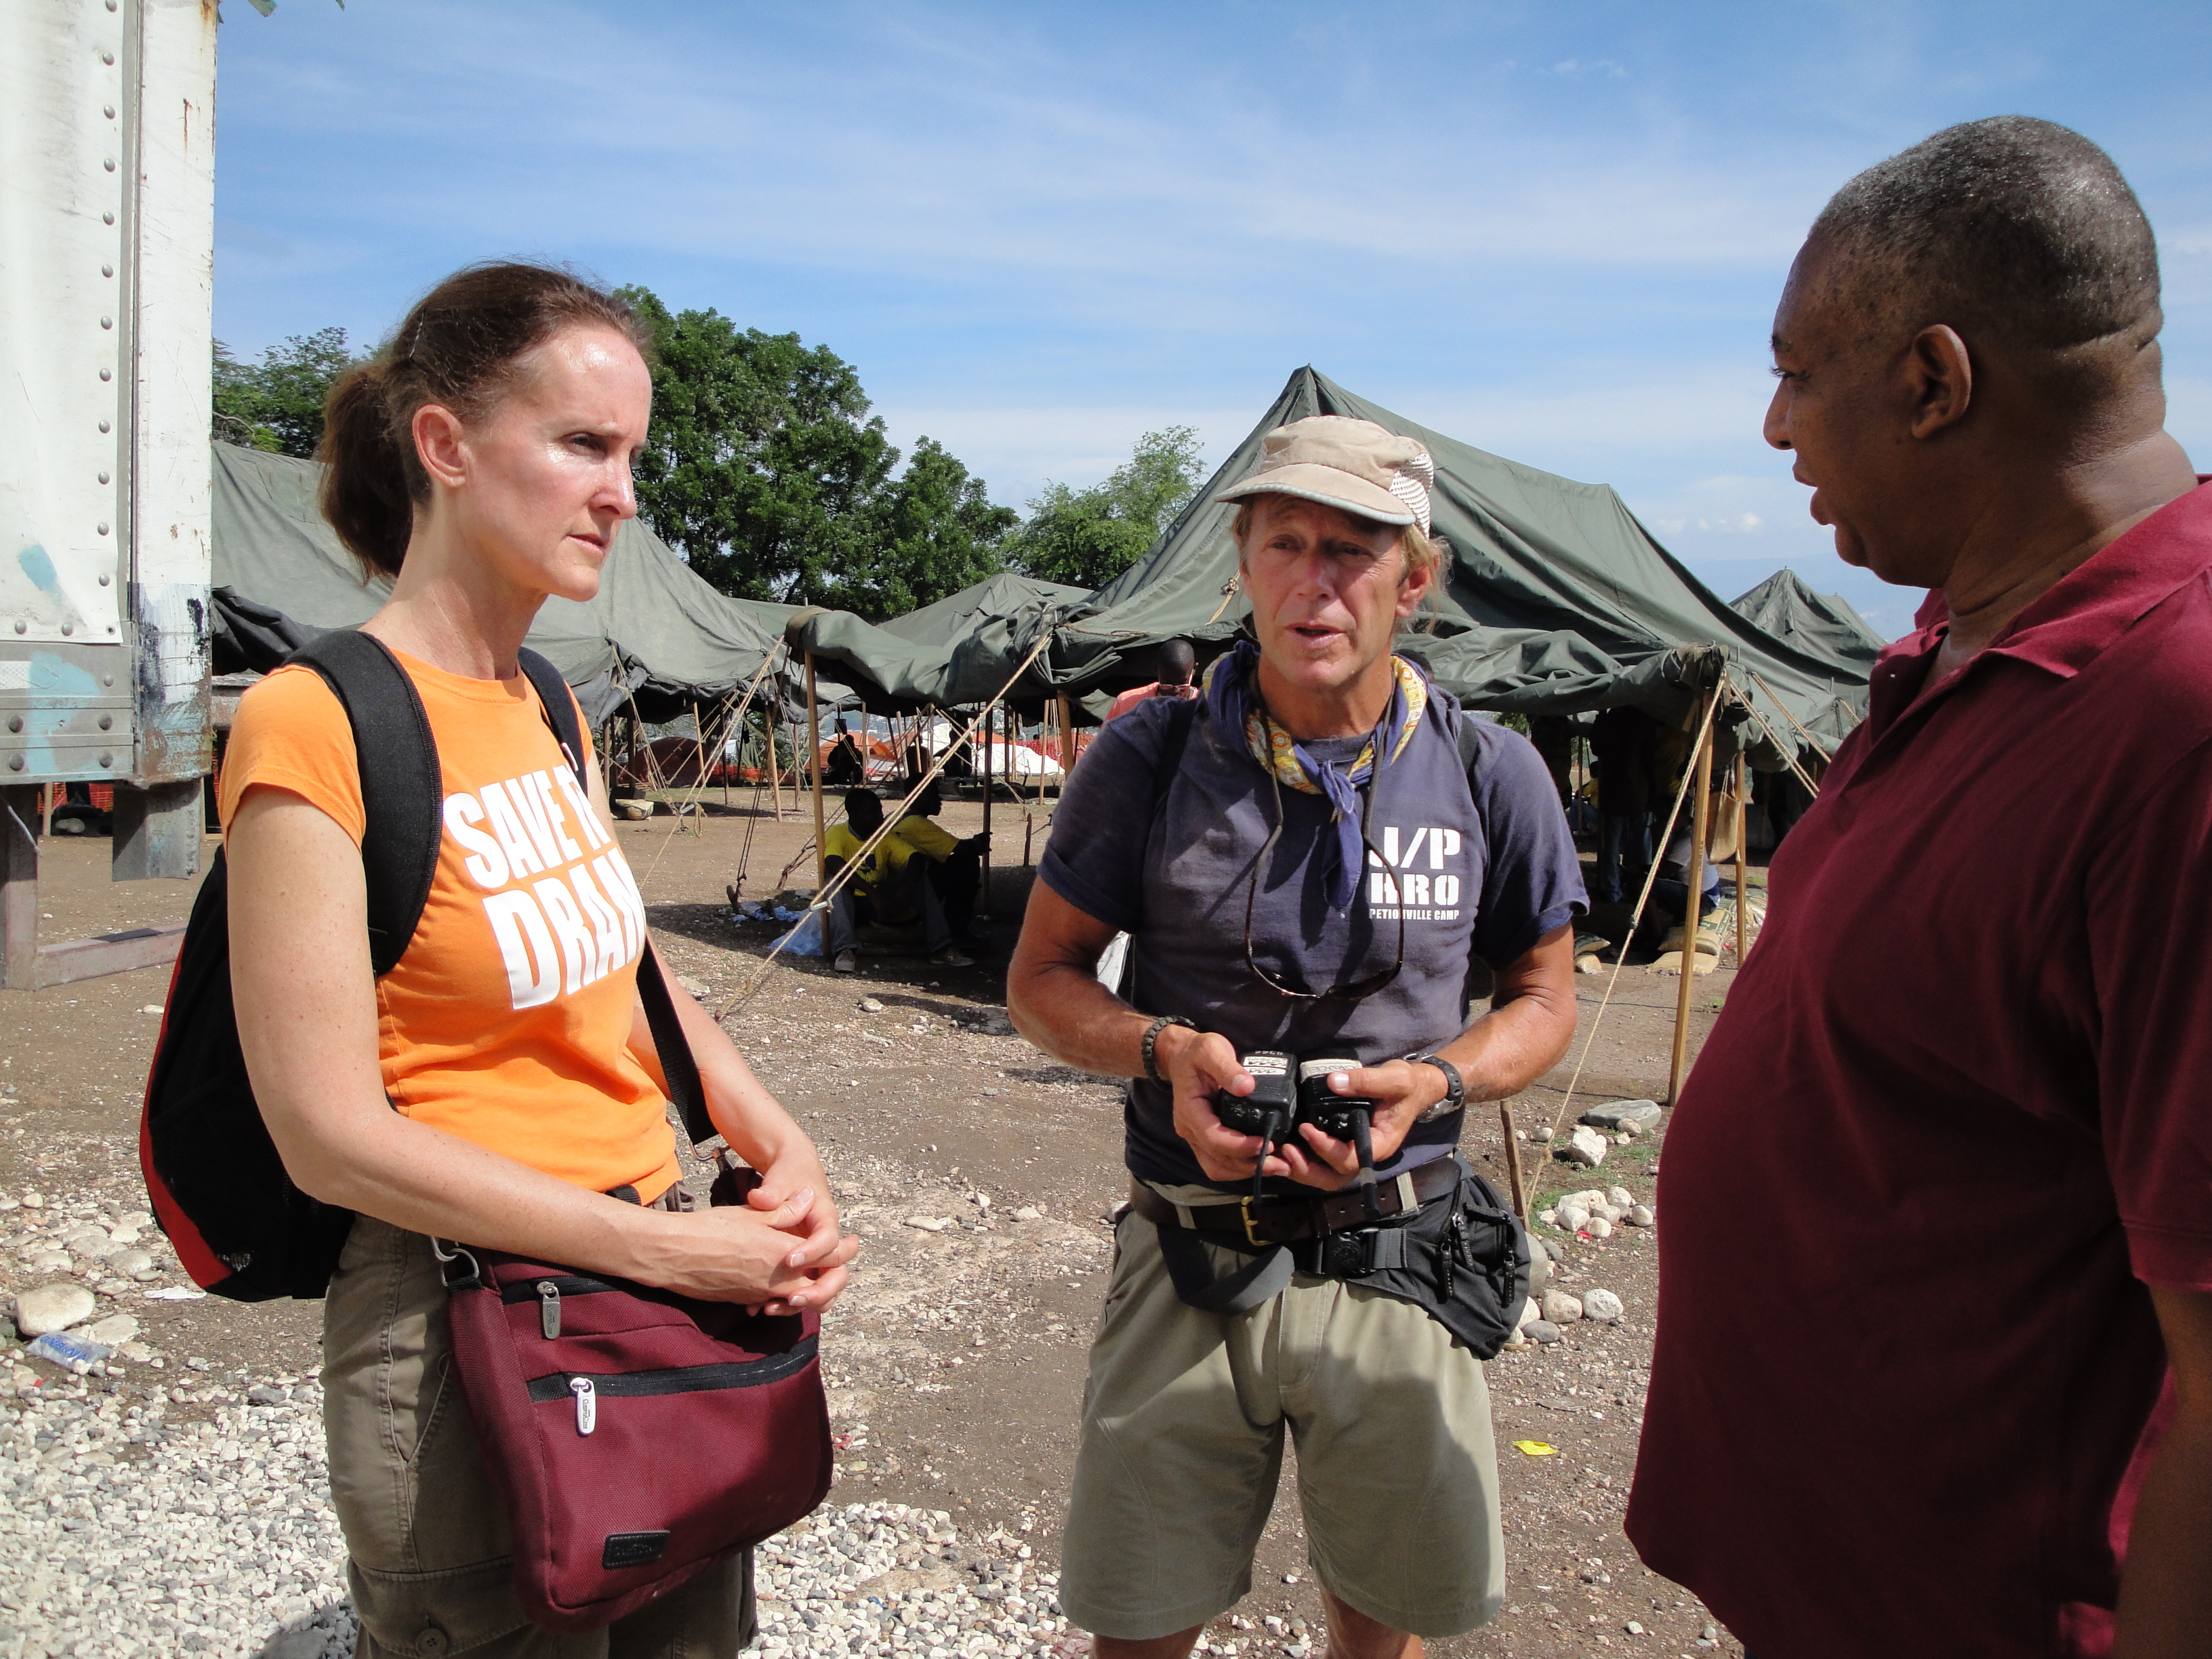 Mary Fry and Raynald Delerme filming at Sean Penn's camp (J/P HRO) in Haiti.